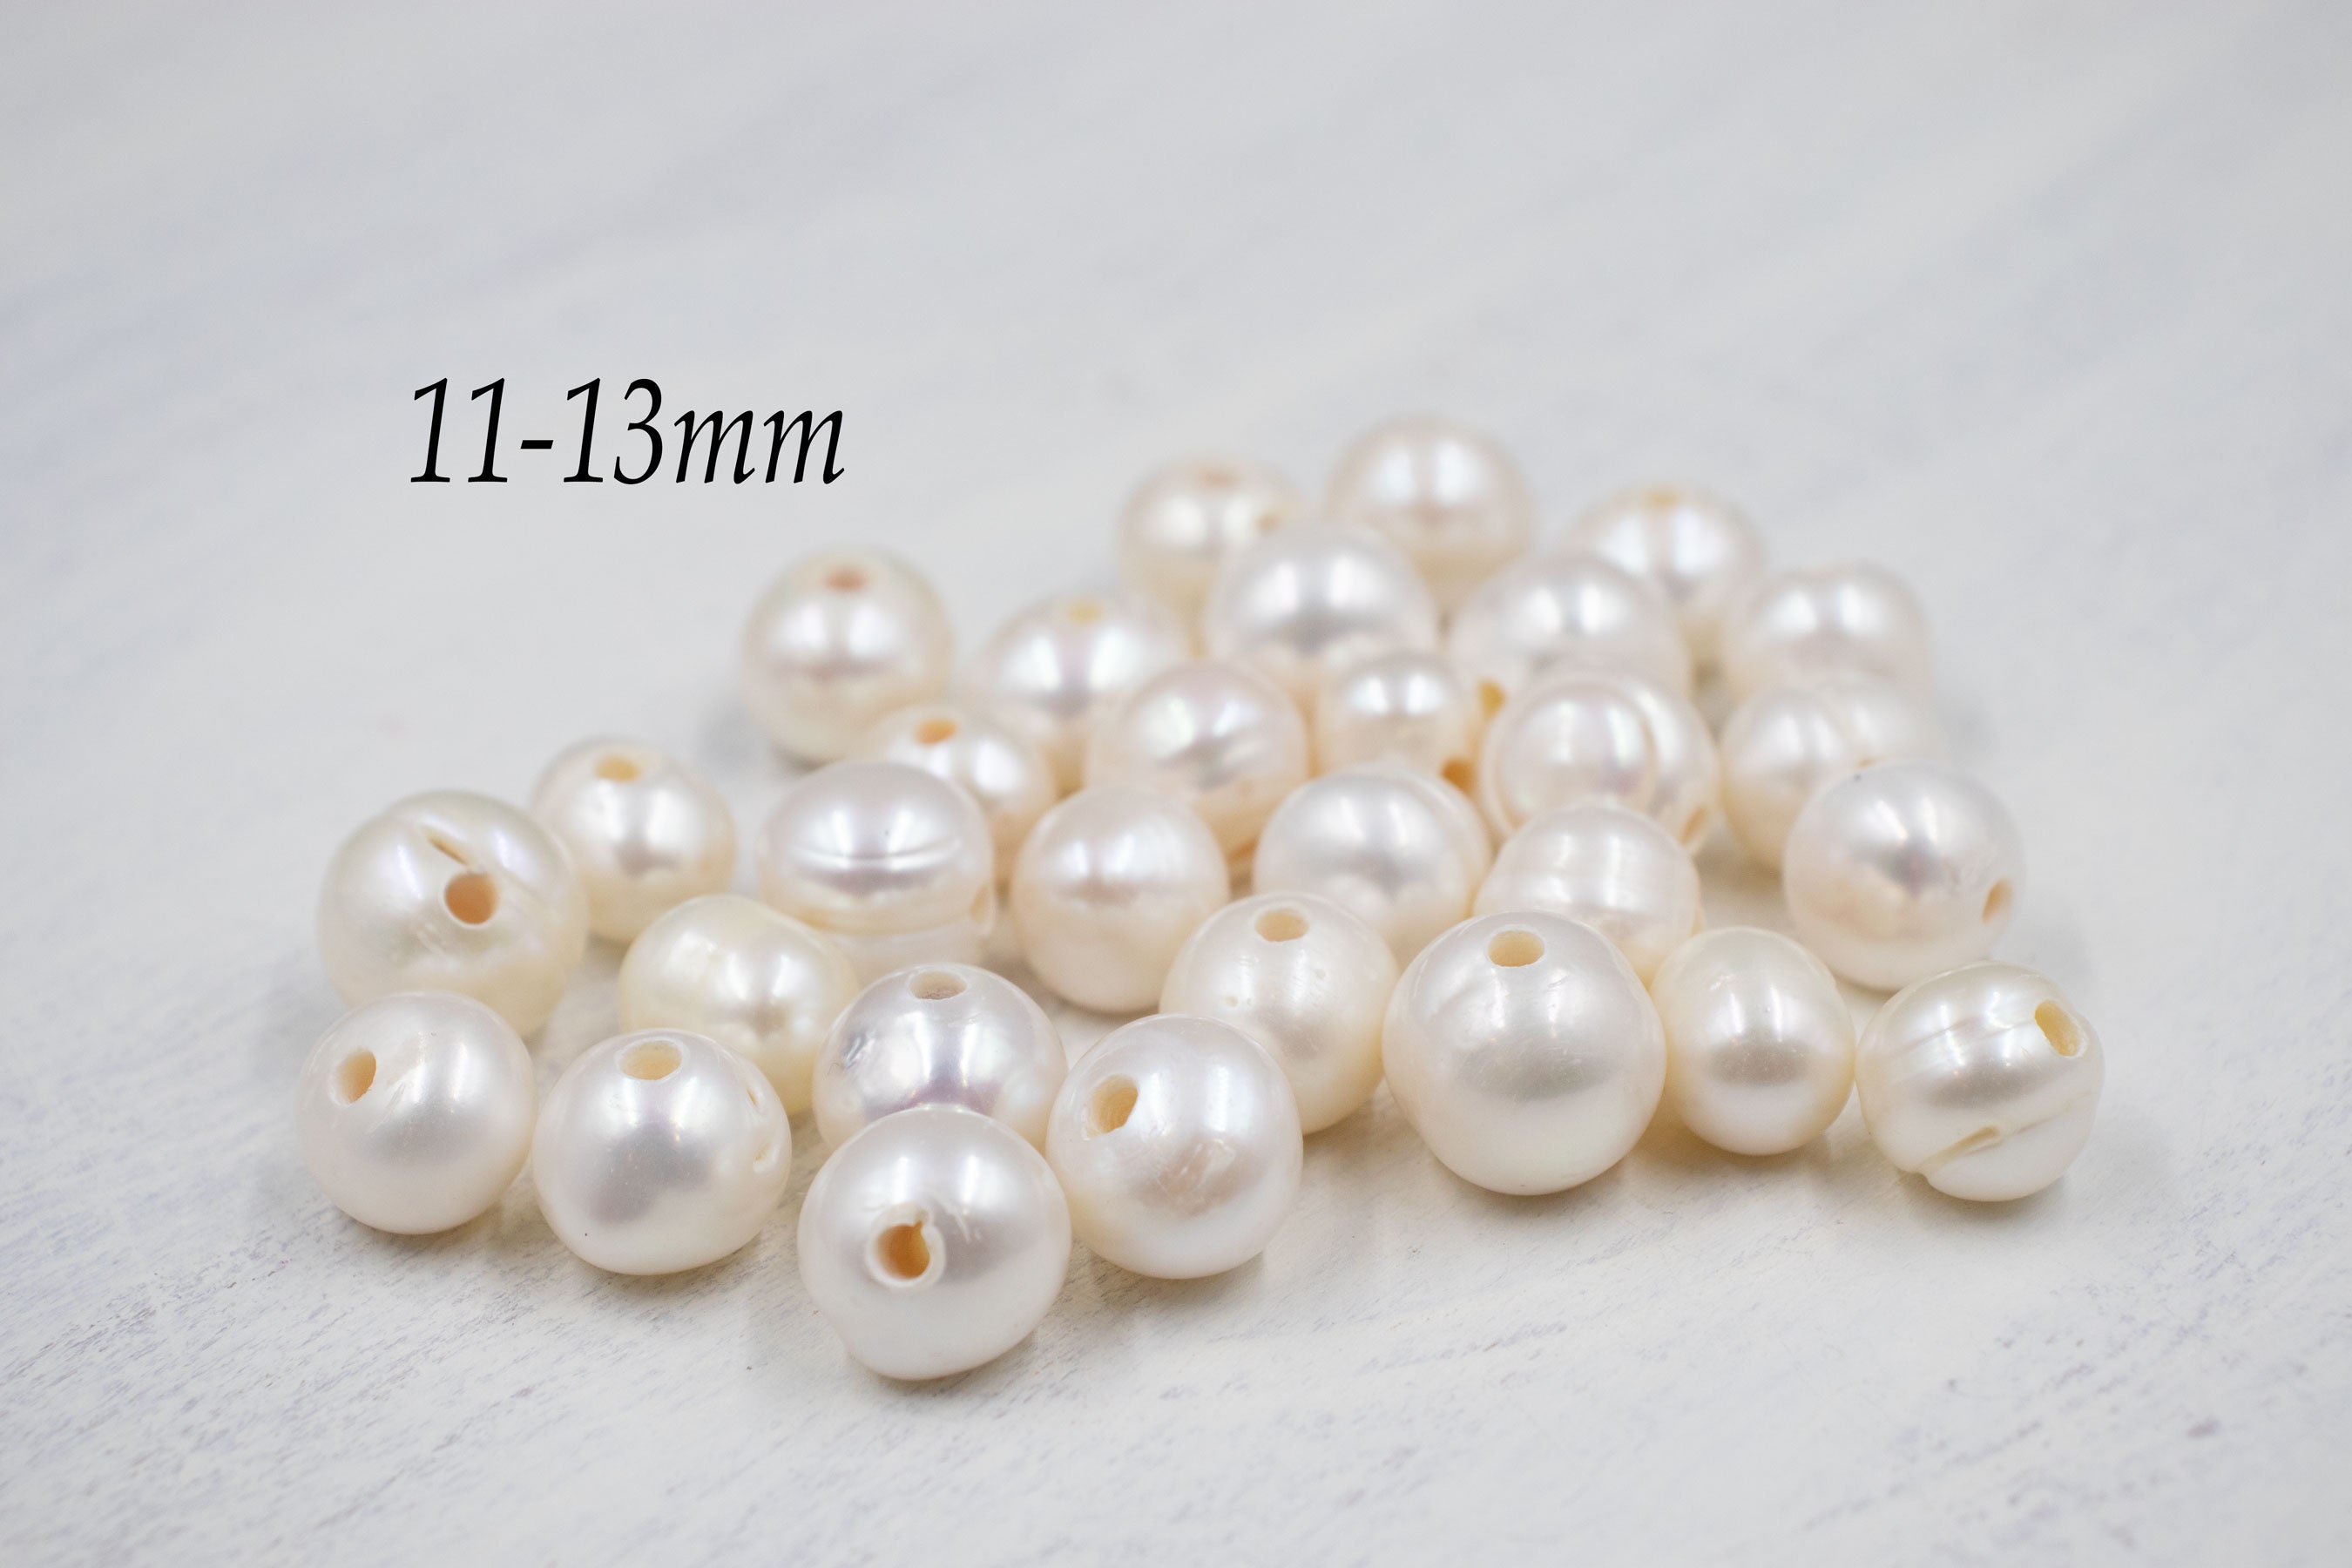  Natural Pearl Beads Natural Oval Freshwater Cultured White  Pearl Loose Beads Quality Level AAA for Jewelry Making Charms Necklace as  Gift 5-6 mm 14.2 inches (2 Strands)